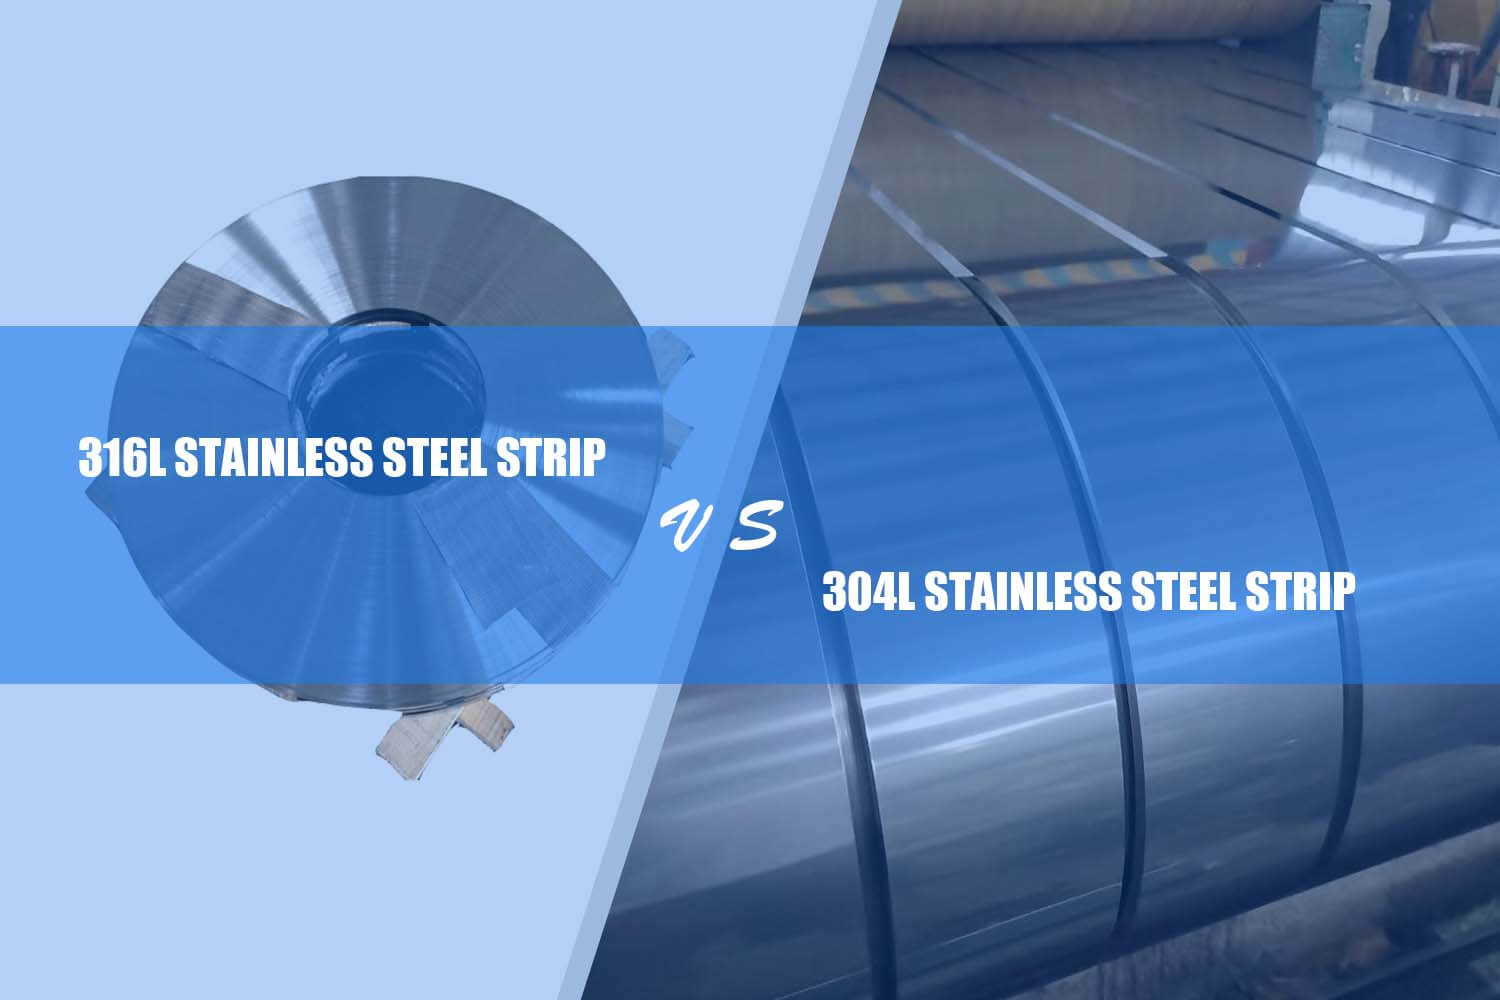 the difference between 316l and 304l stainless steel strip